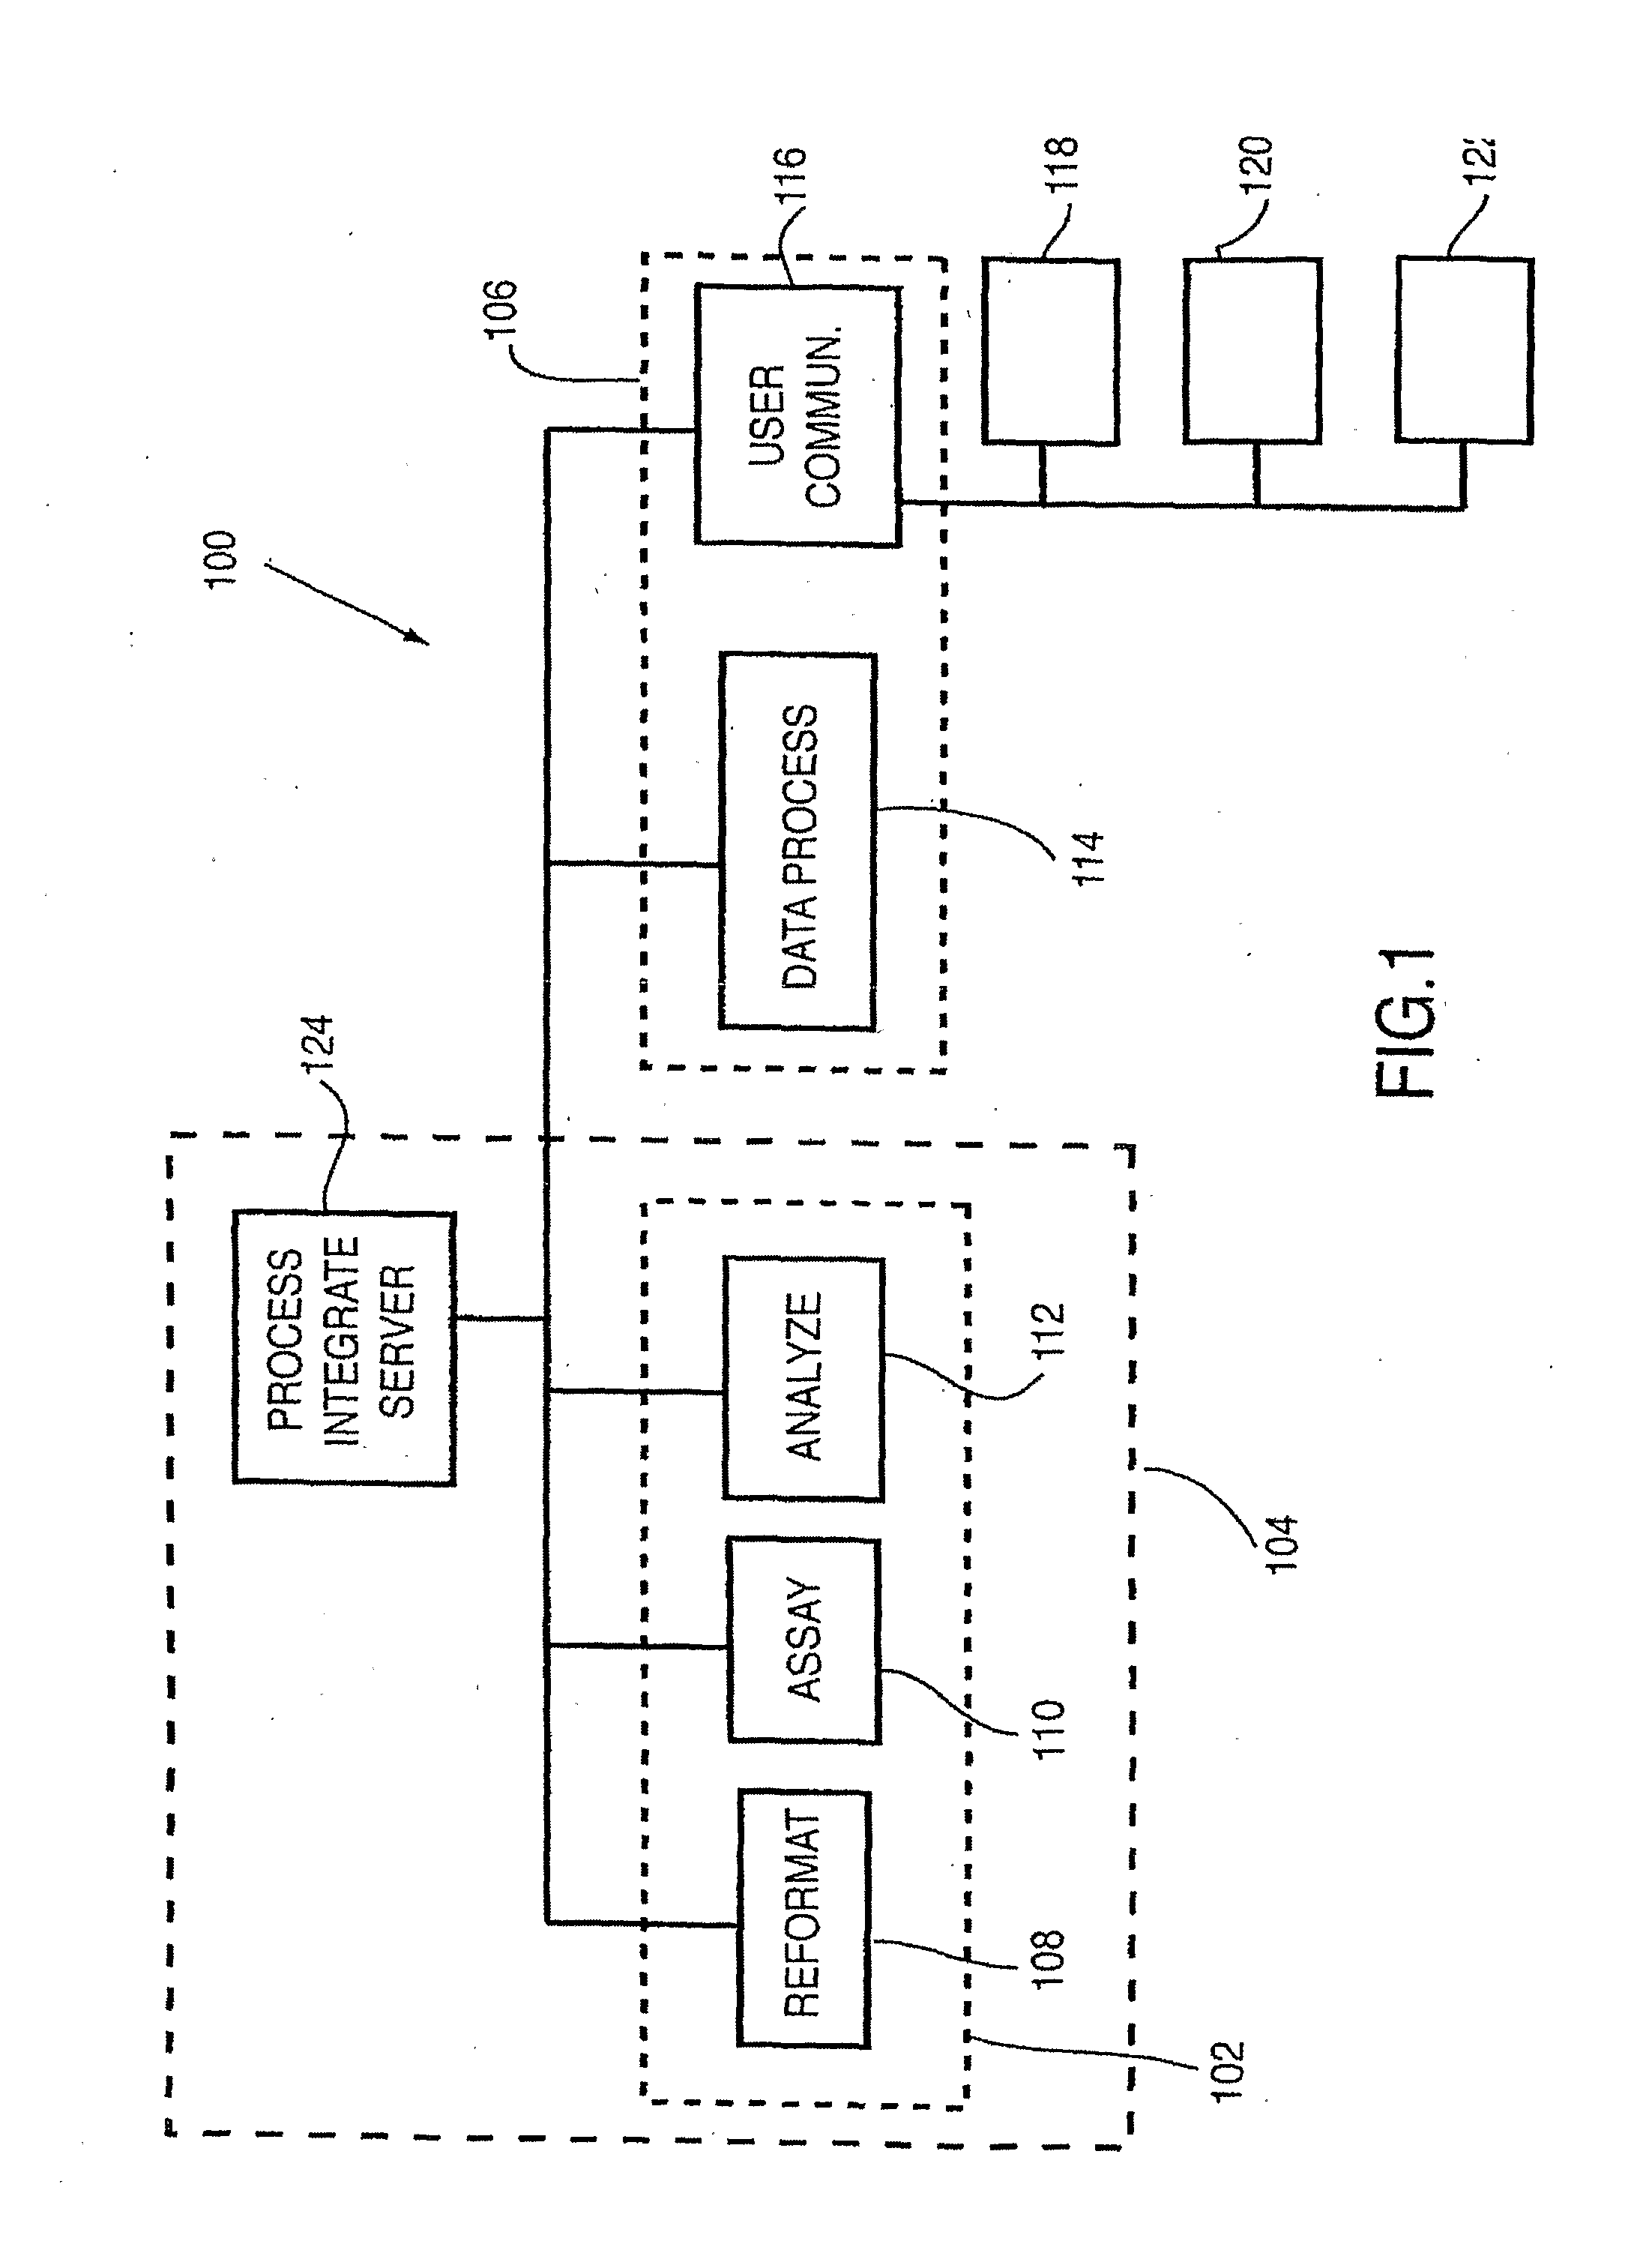 Method and System for Sample Testing